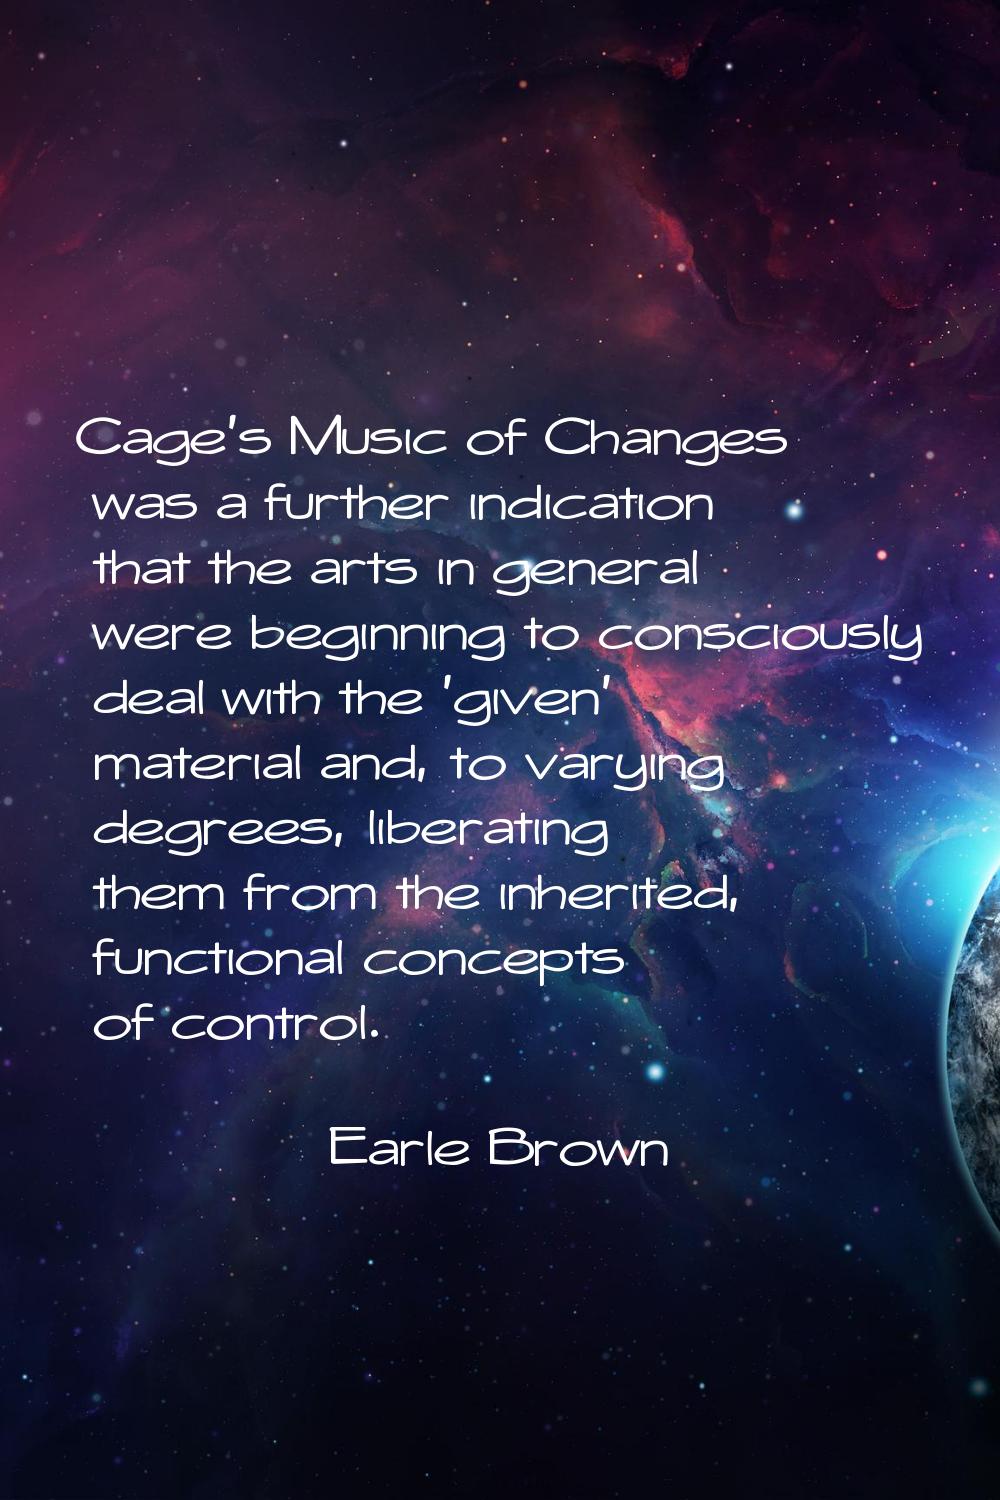 Cage's Music of Changes was a further indication that the arts in general were beginning to conscio